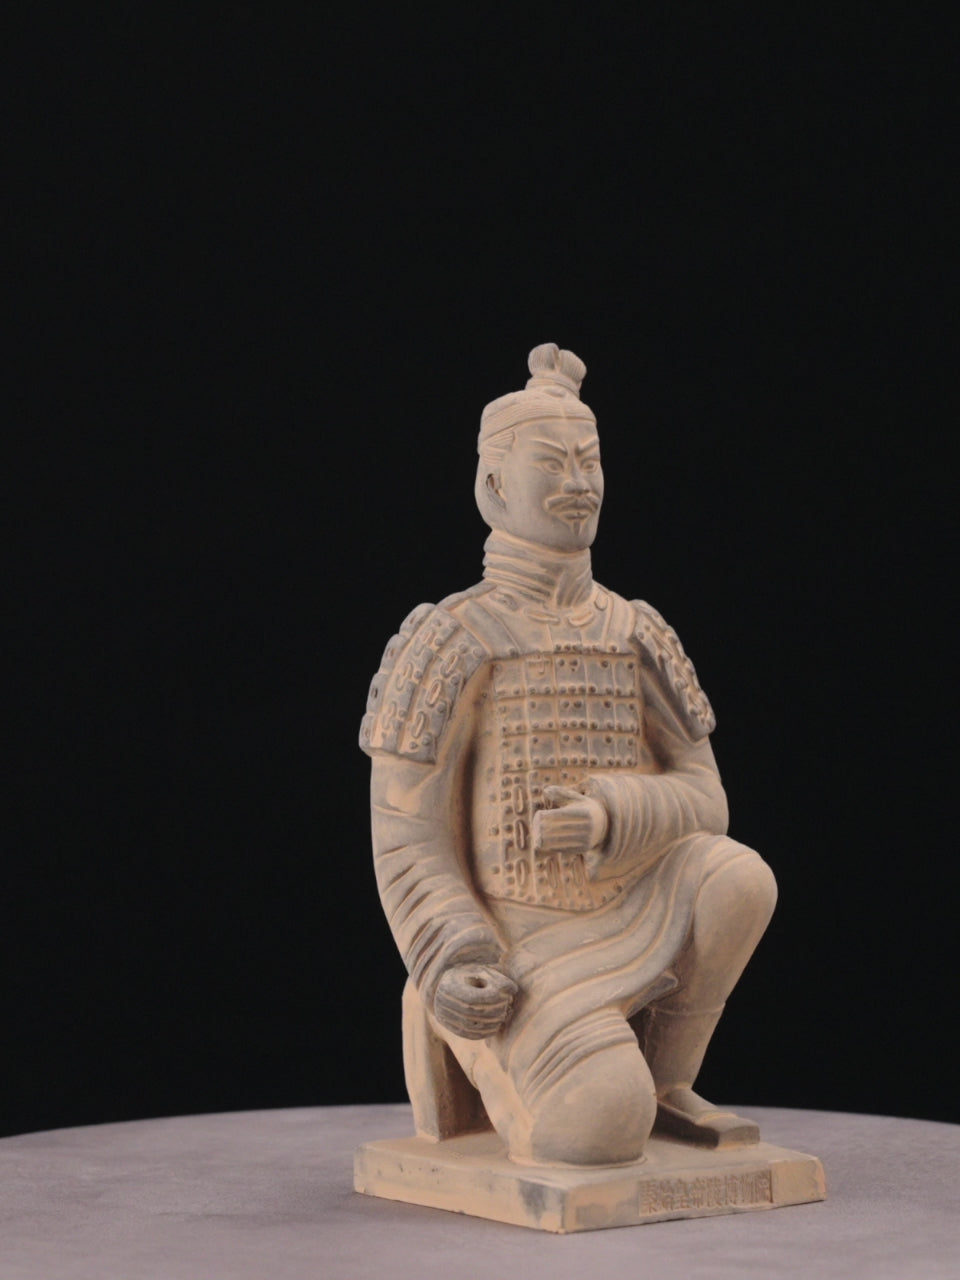 360-Degree View: Explore the 25CM Kneeling Archer figurine from every angle, showcasing its unique pose, detailed features, and hand-painted artistry.